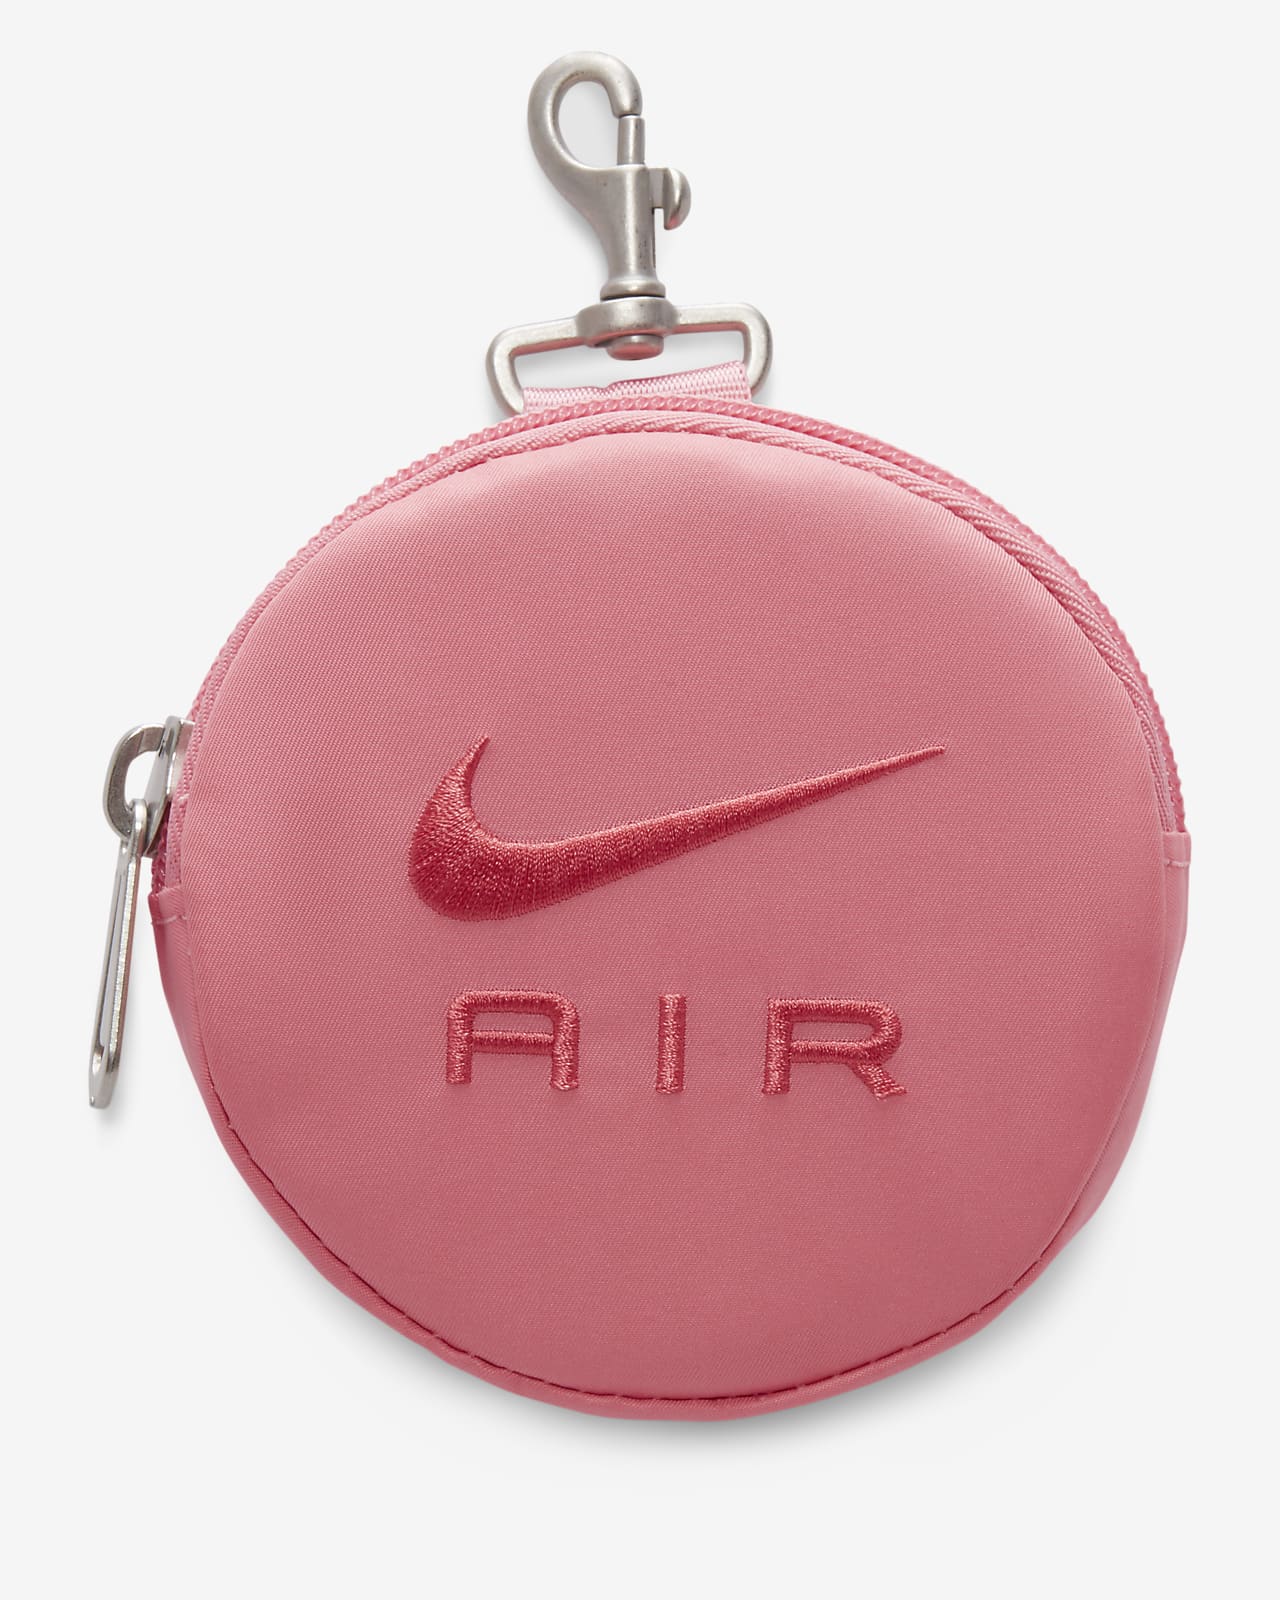 Inspired by Nike Airpod Case Nike Airpods Leather Nike Vintage